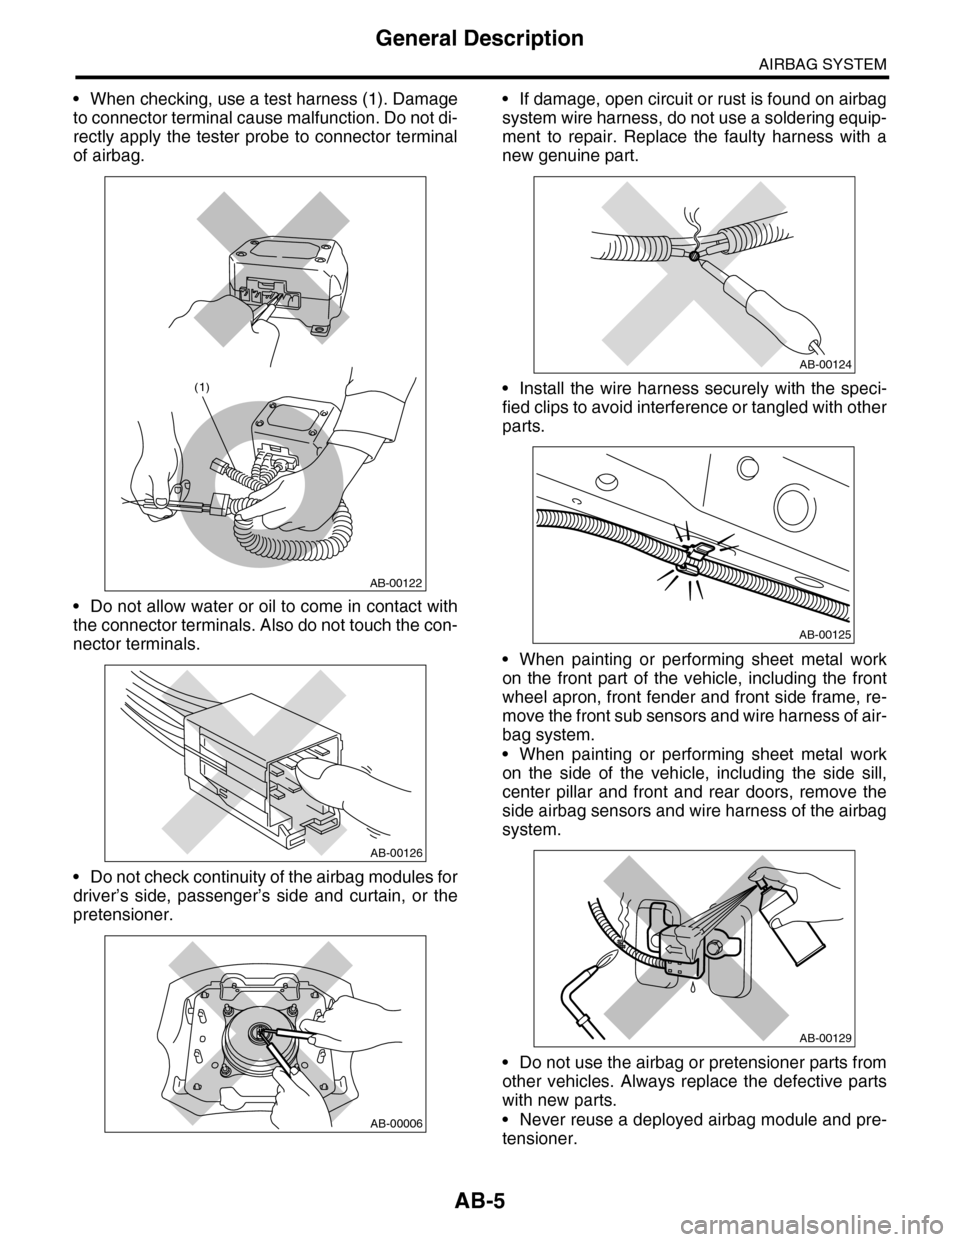 SUBARU TRIBECA 2009 1.G Service Workshop Manual AB-5
General Description
AIRBAG SYSTEM
•When checking, use a test harness (1). Damage
to connector terminal cause malfunction. Do not di-
rectly apply the tester probe to connector terminal
of airba